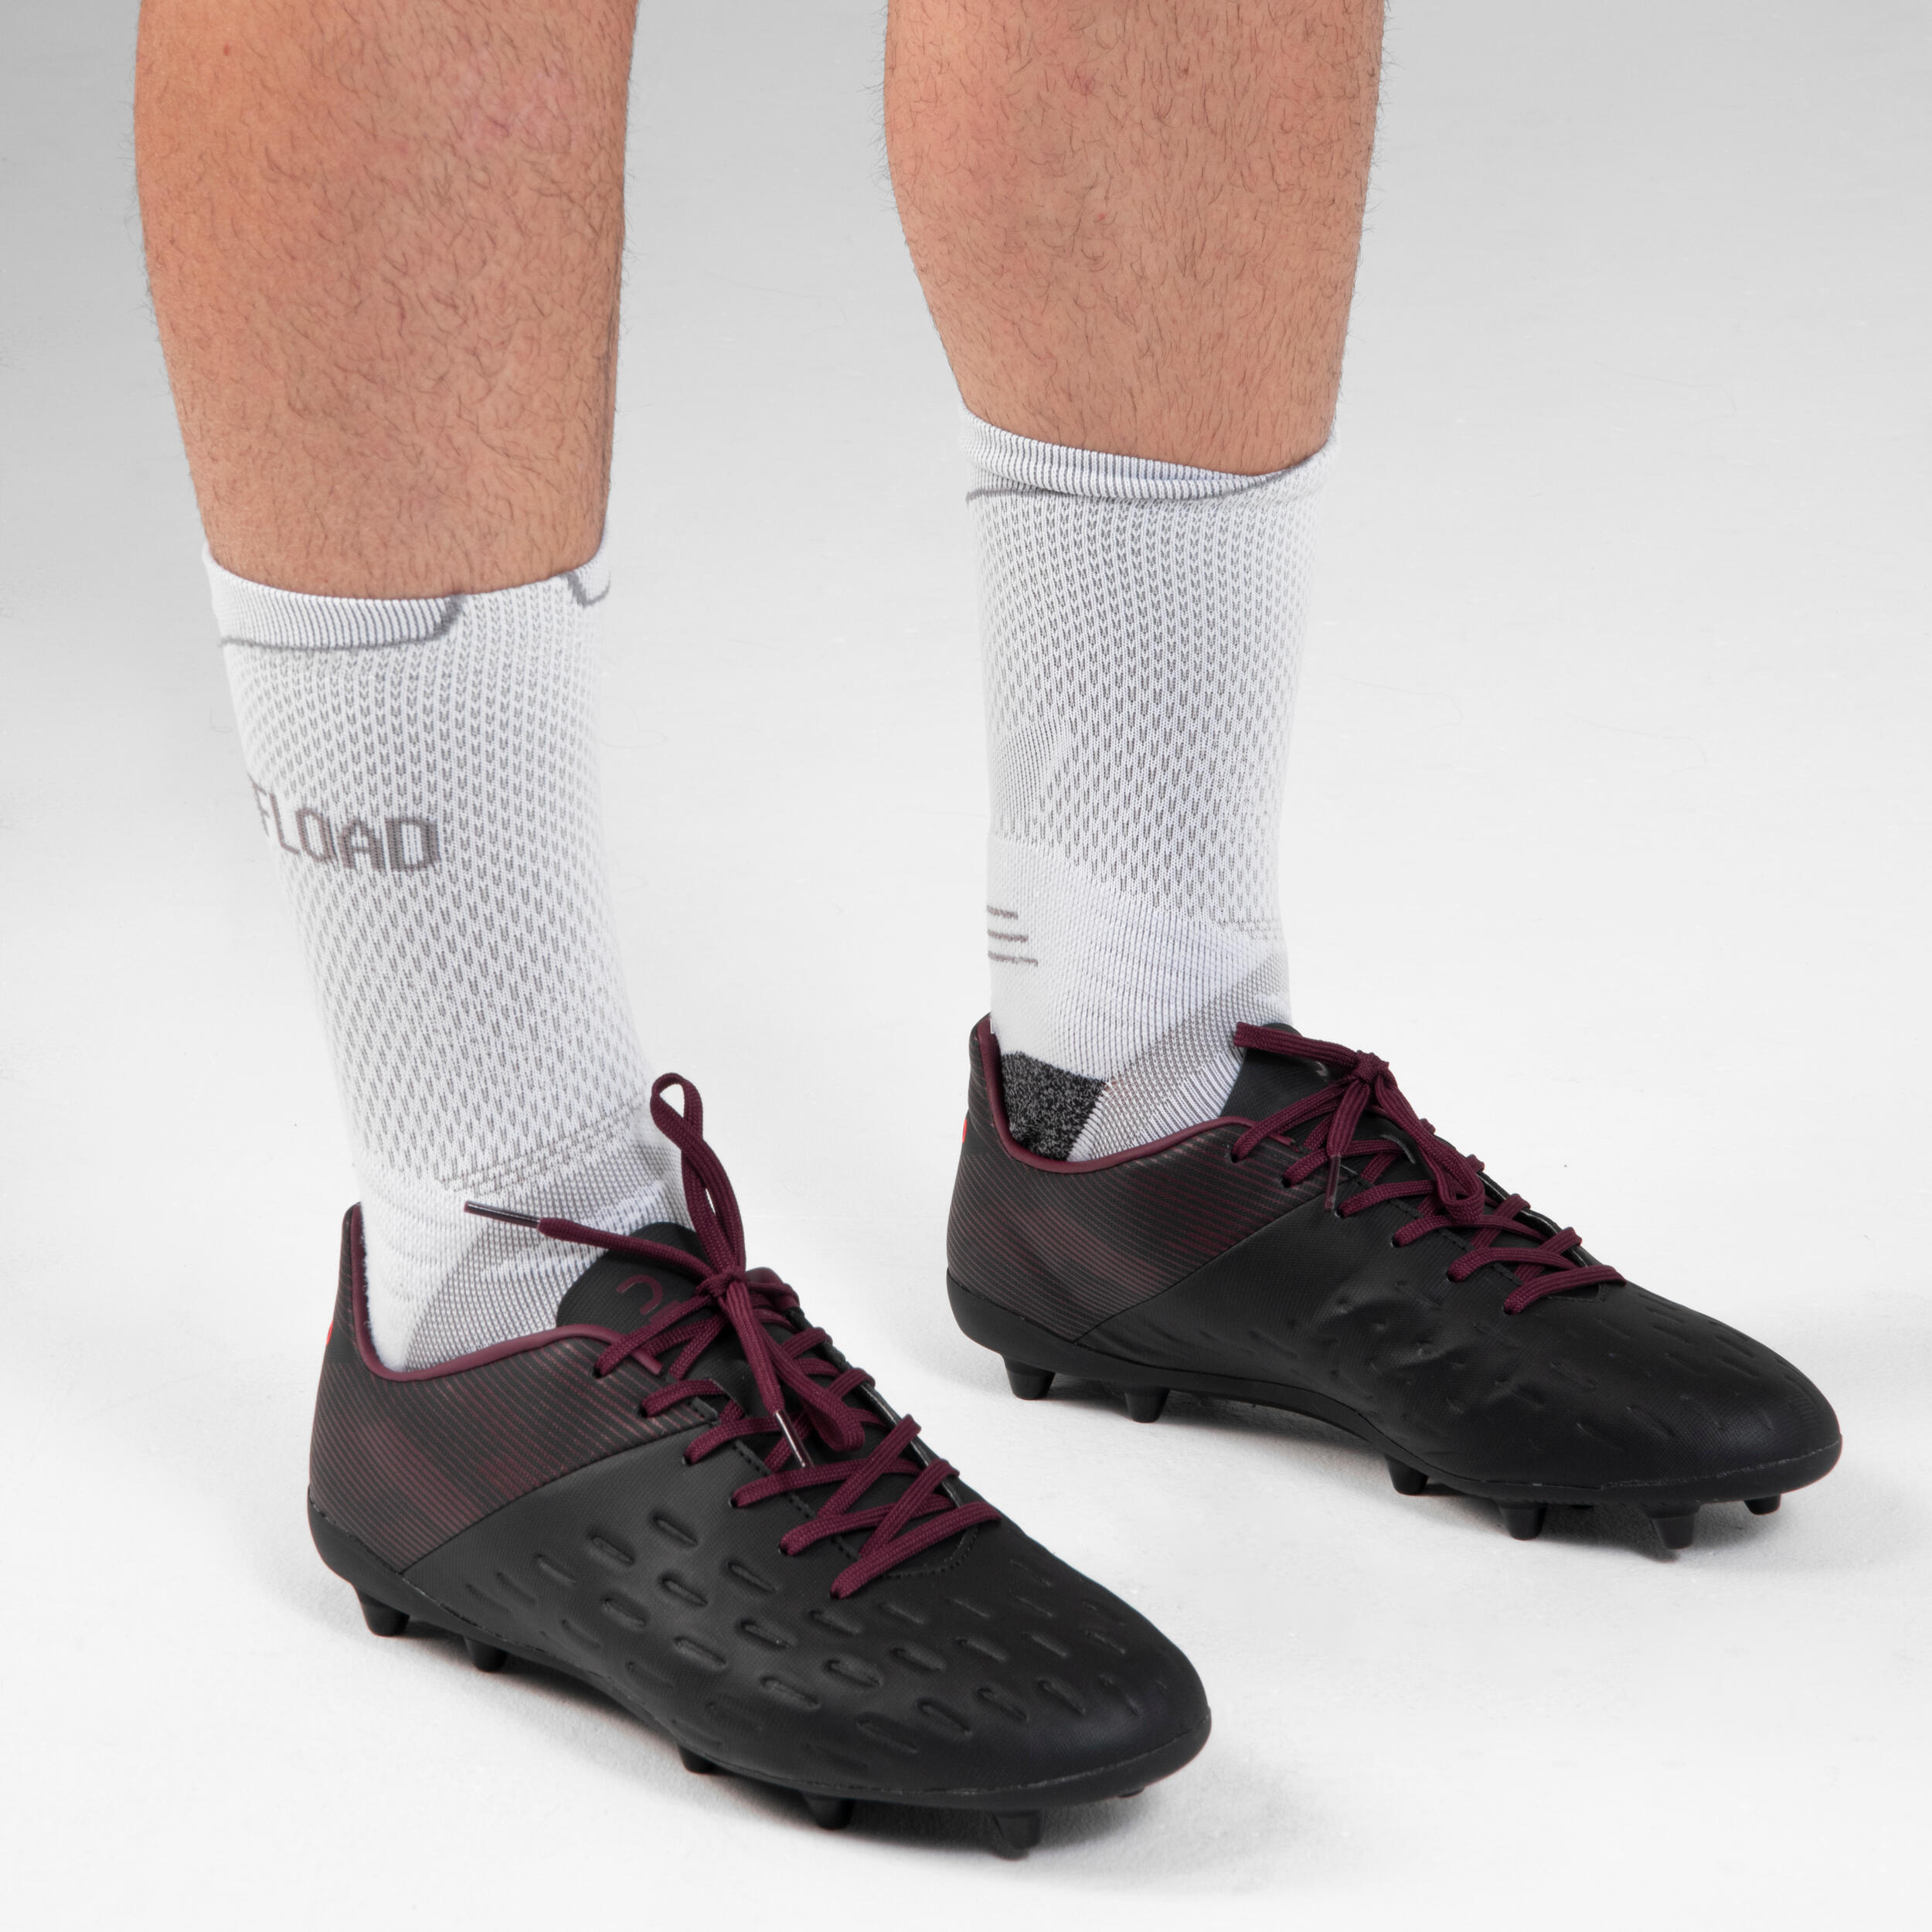 Men's Moulded Dry Pitch Rugby Boots Advance R100 FG - Black/Burgundy 9/9